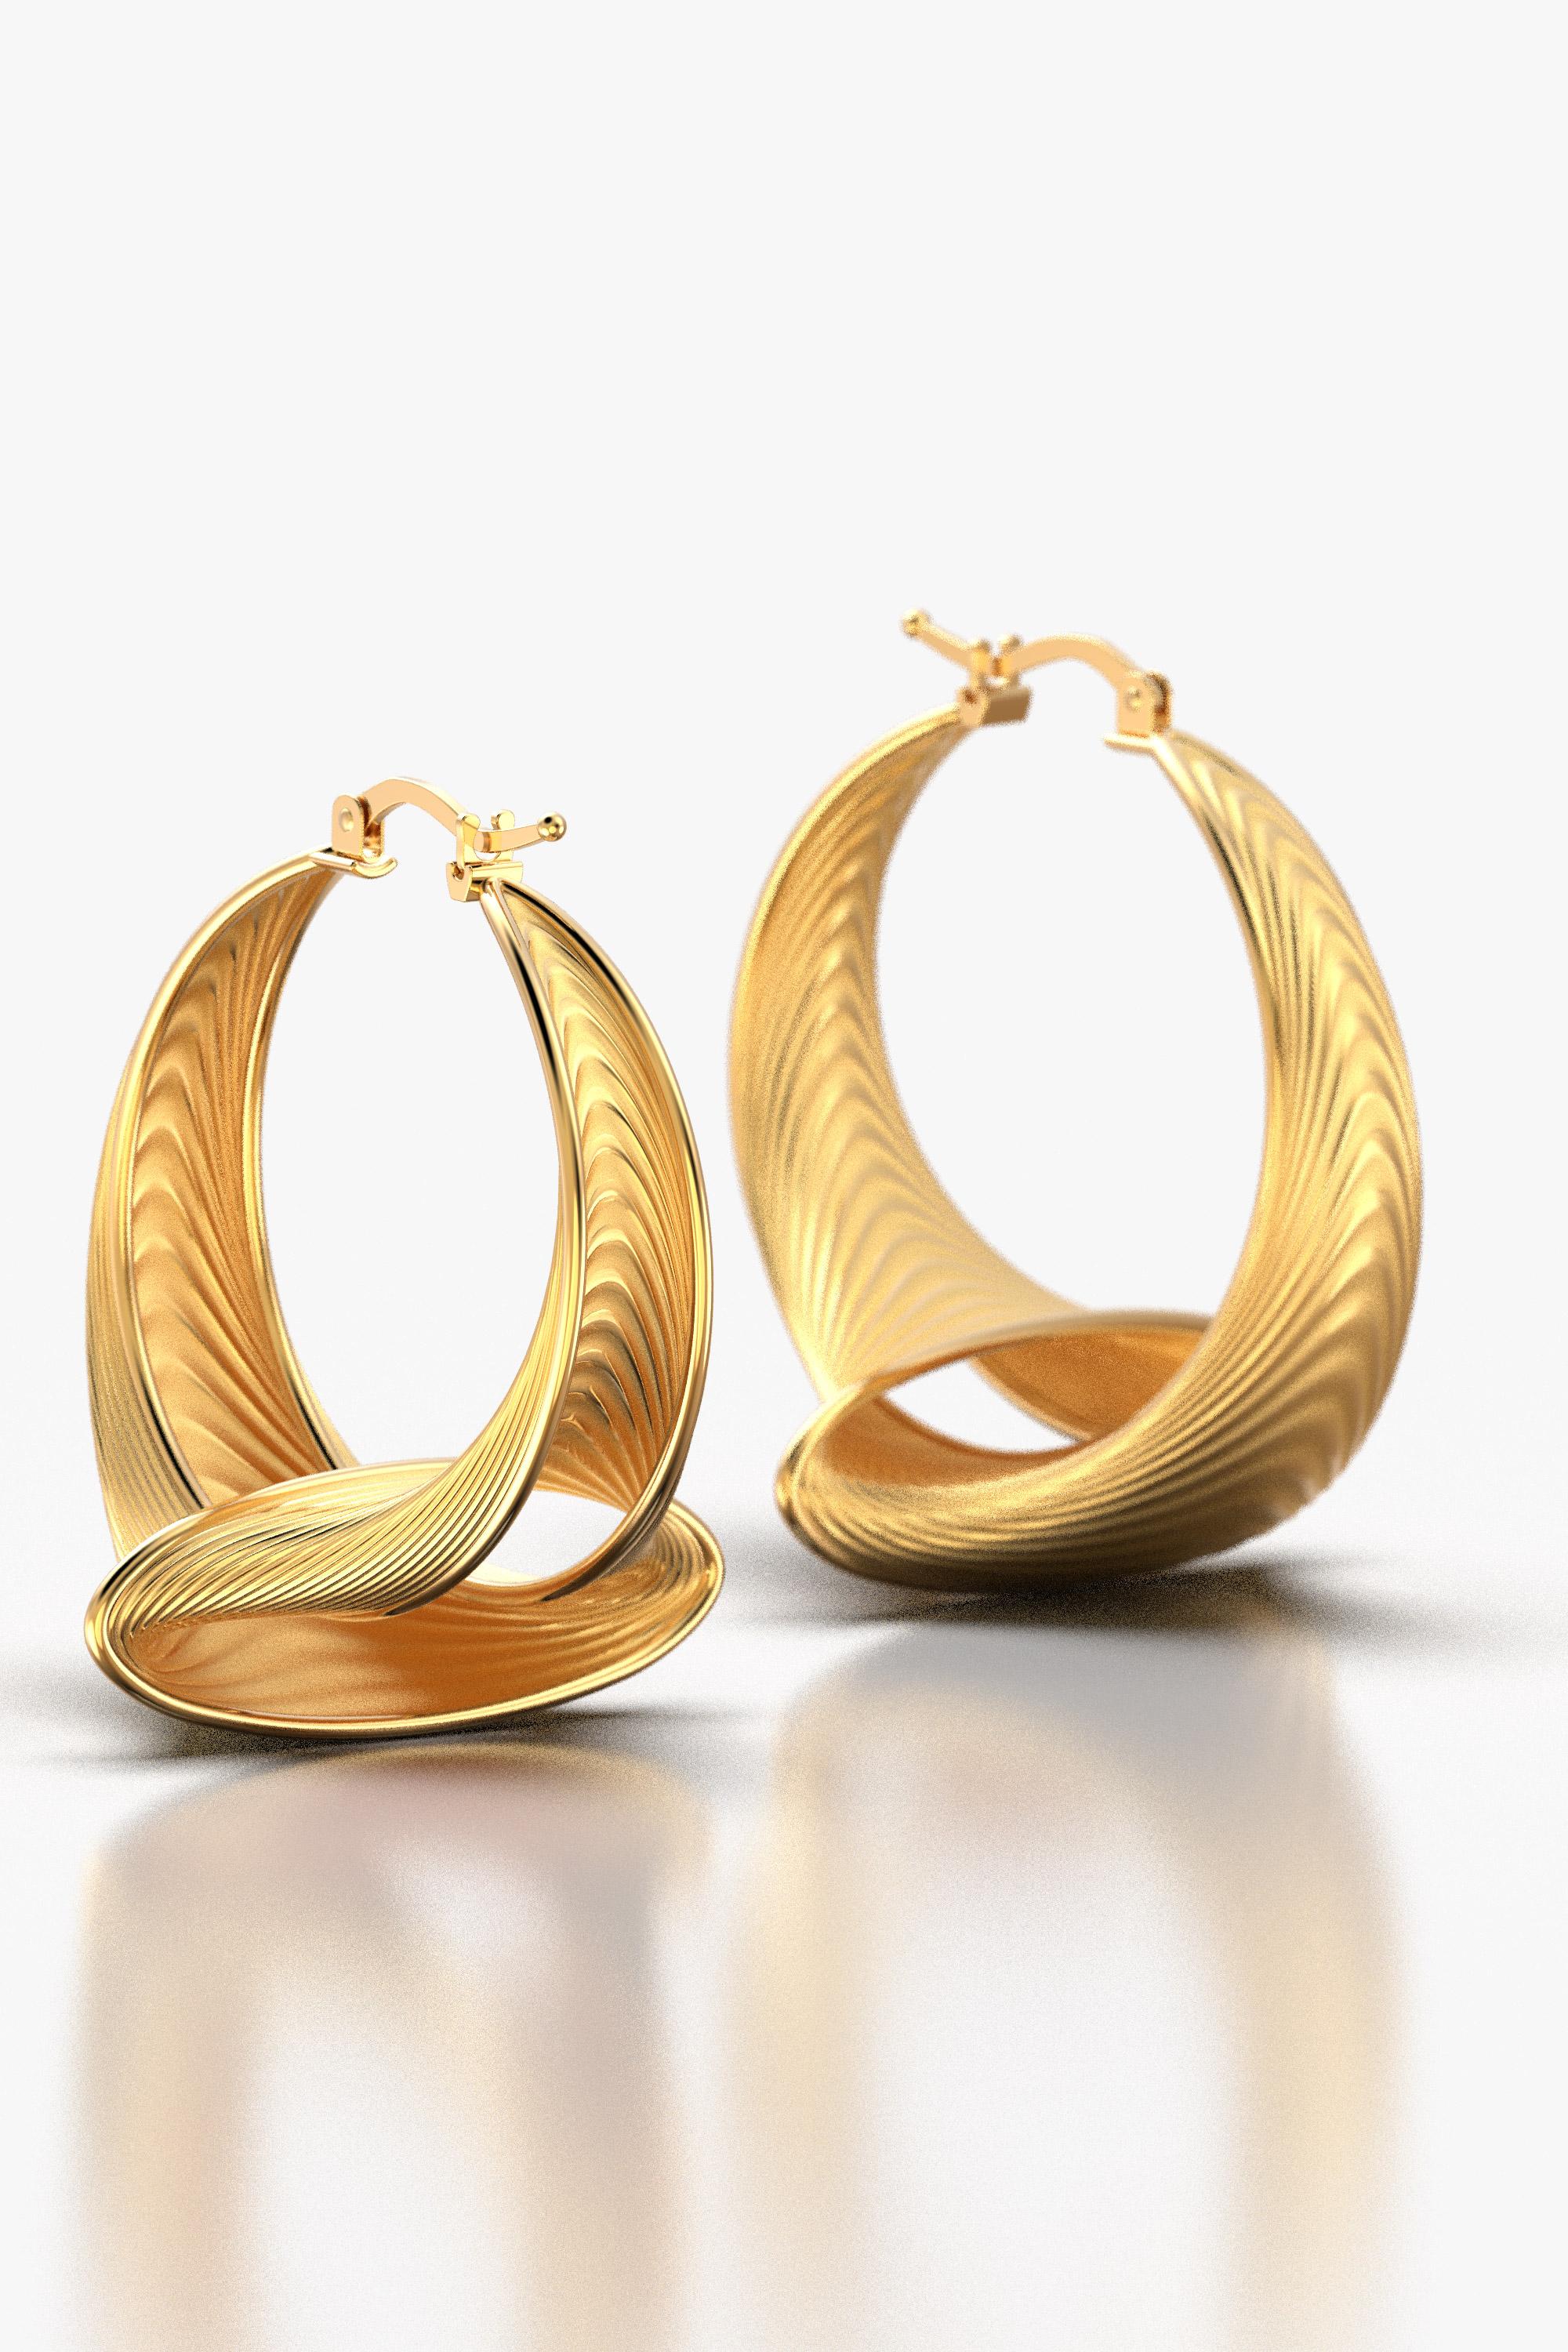 Discover timeless elegance with our Made to order 33mm diameter Large Hoop Earrings. Handcrafted in Italy by Oltremare Gioielli, these Modern Gold Hoop Earrings exude sophistication in 18k gold. Elevate your style with these Contemporary Gold